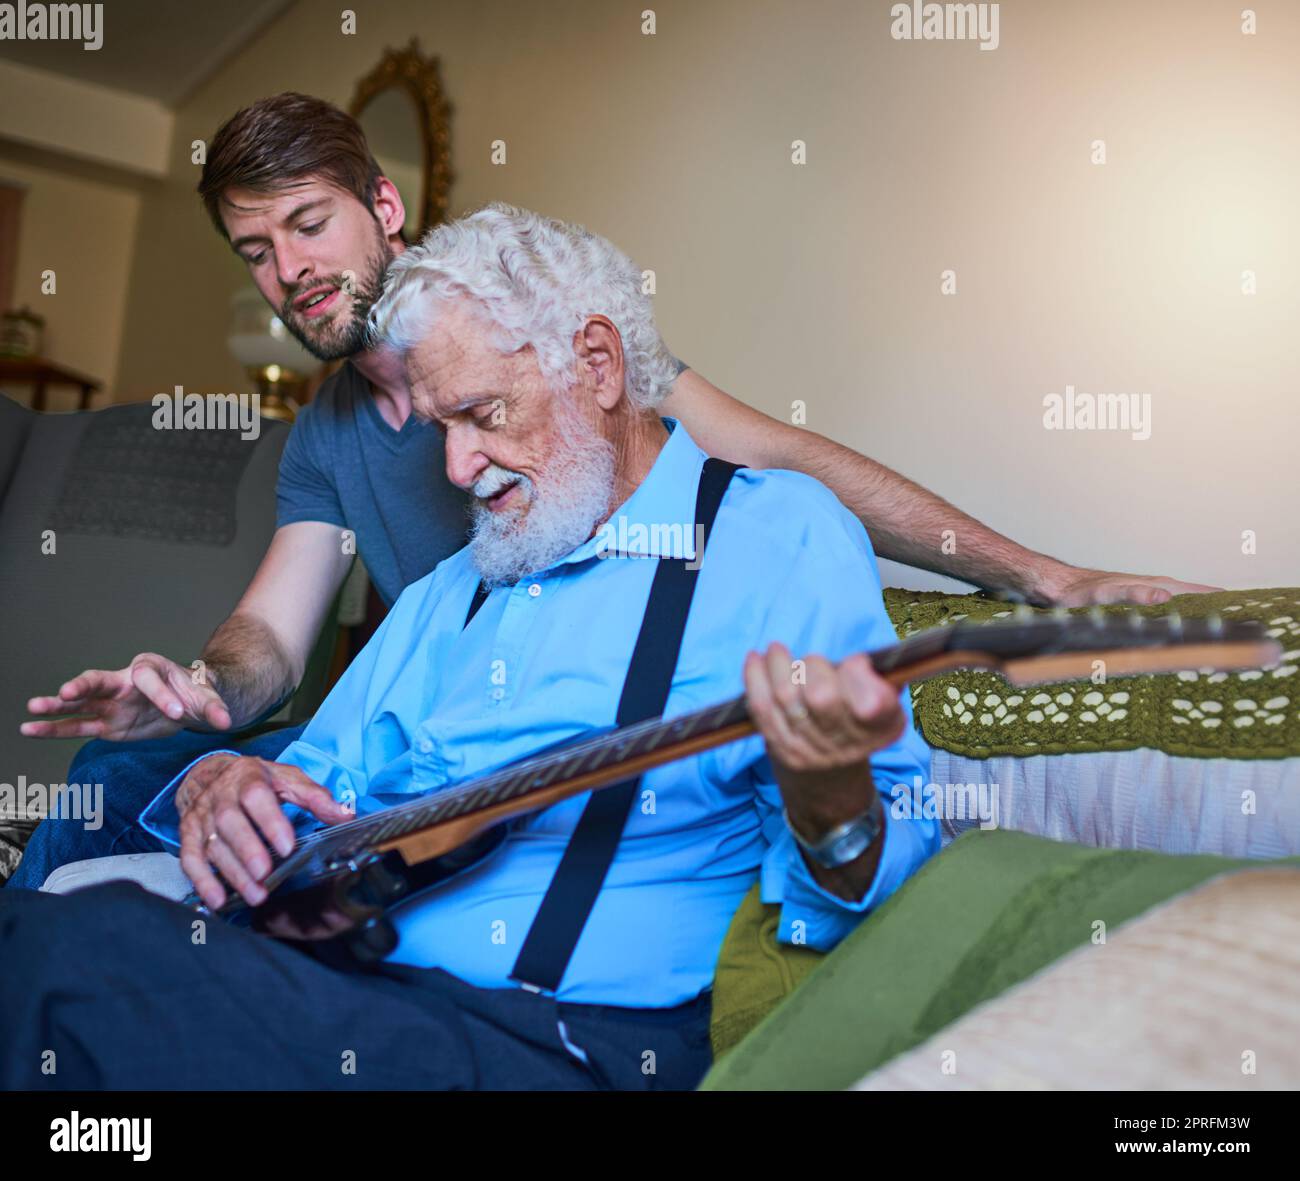 Teaching him a riff or two. a happy young man teaching his elderly grandfather to play the electric guitar on the couch at home. Stock Photo